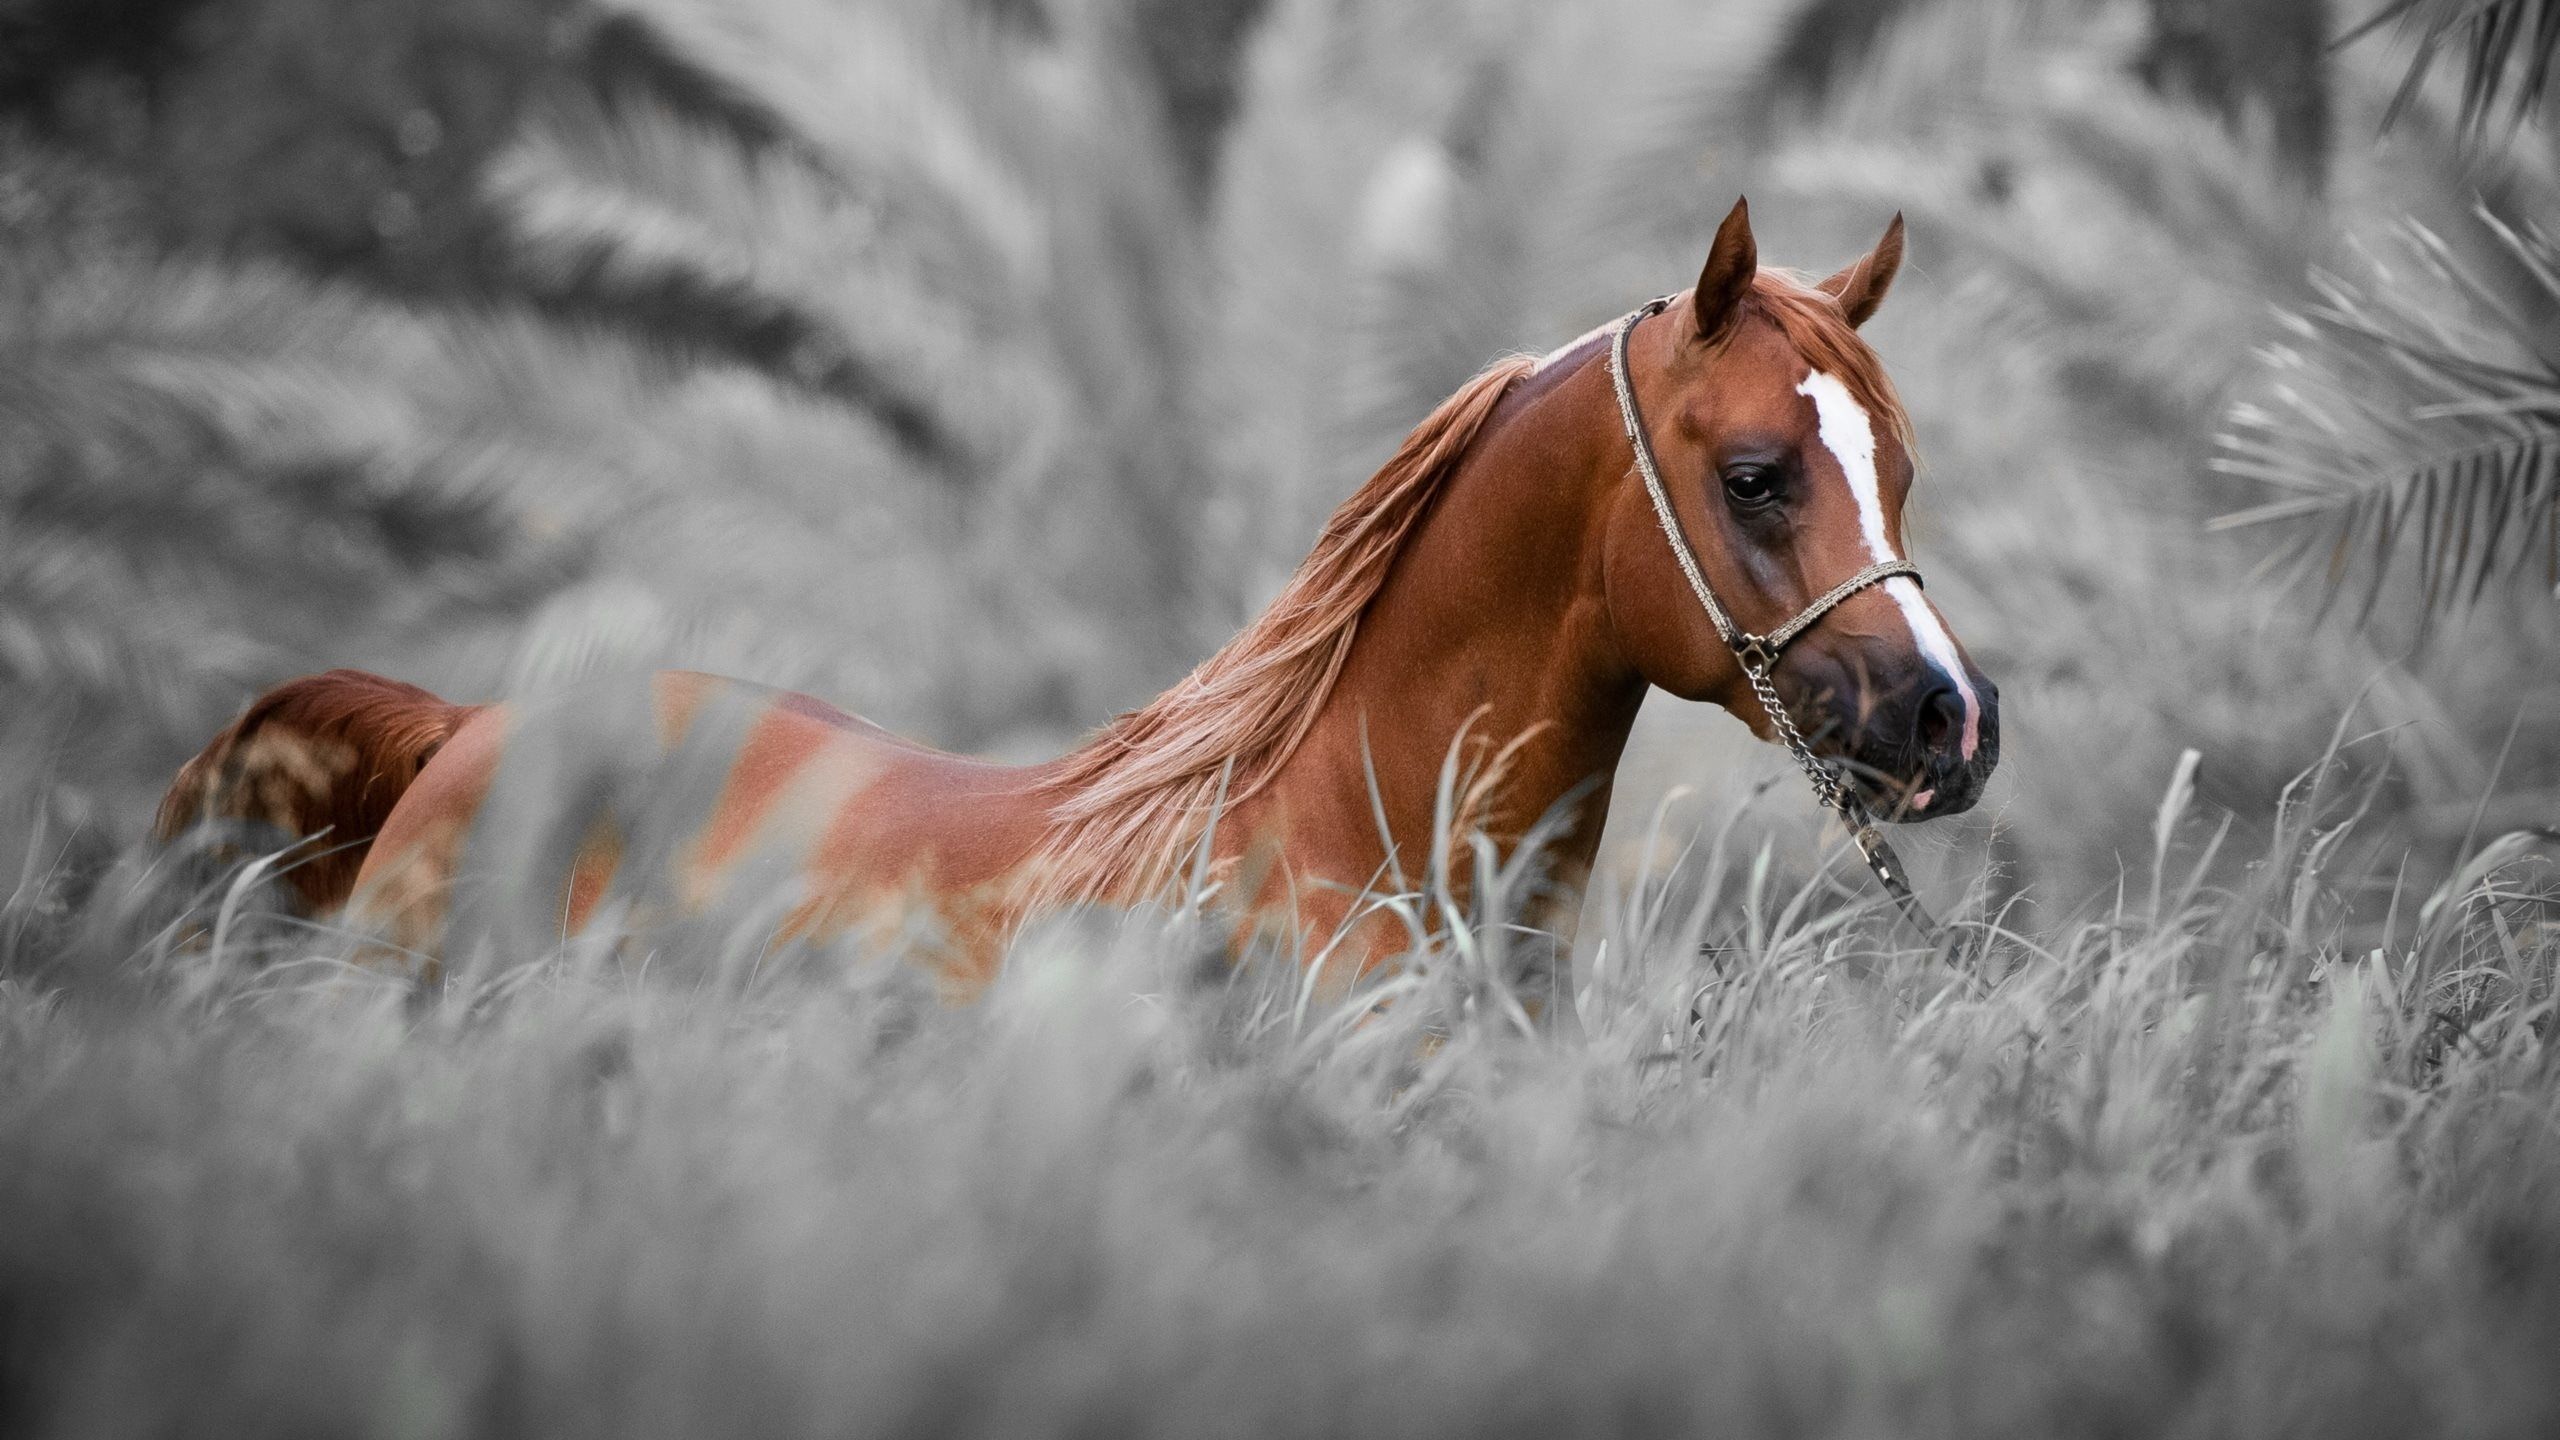 15 Choices 4k wallpaper horse You Can Download It free - Aesthetic Arena